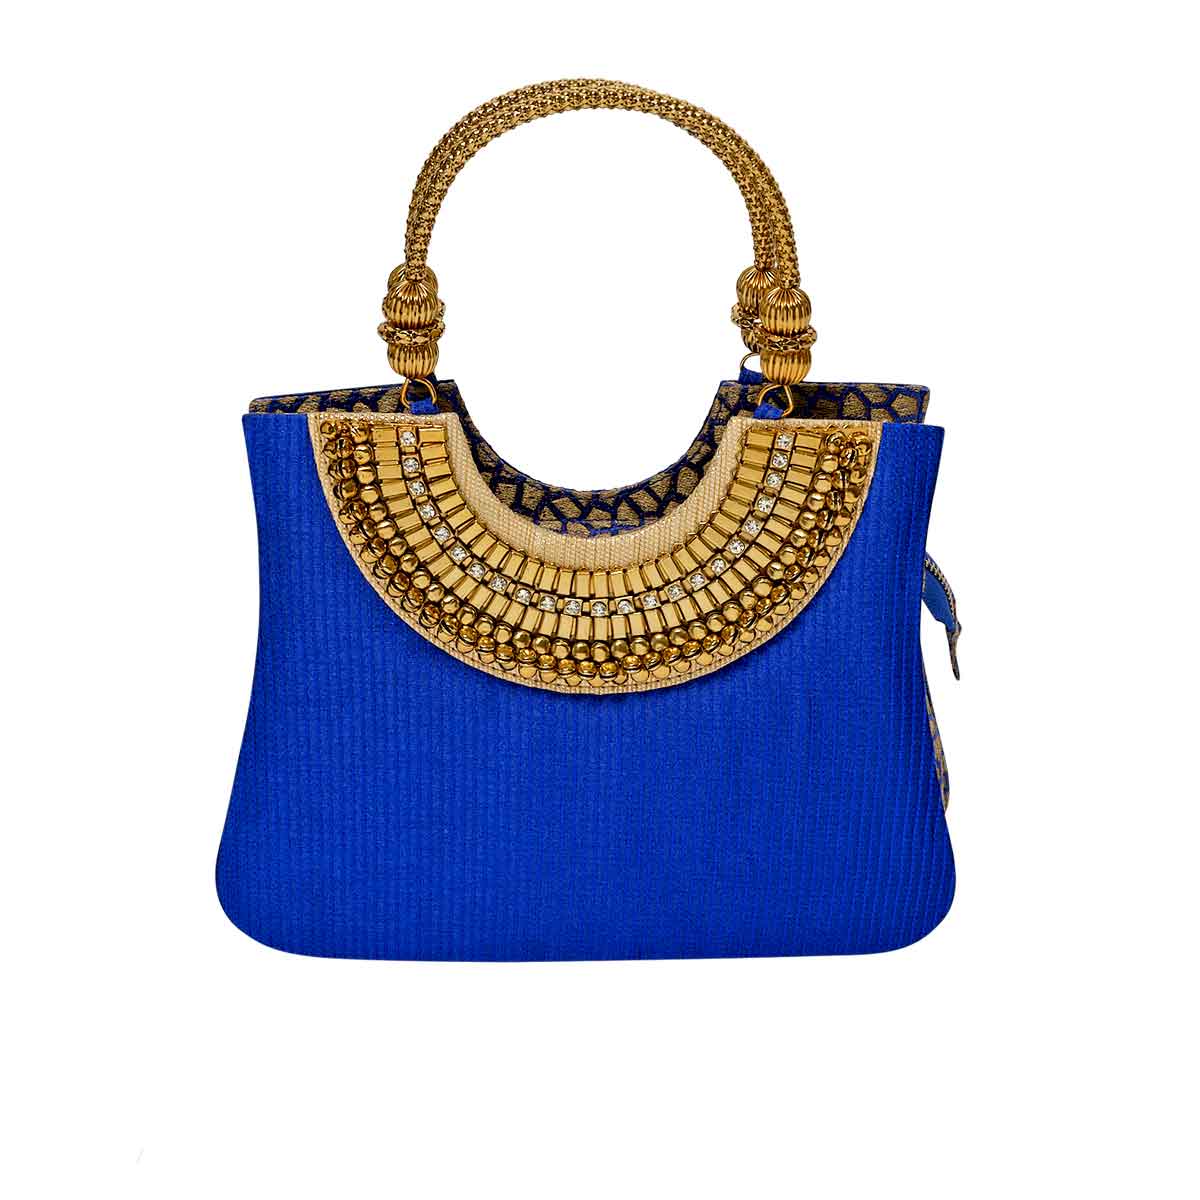 Suriya Mini tote blue and gold with ornate handles. As seen on ramp at NYFW 2021  and editorials